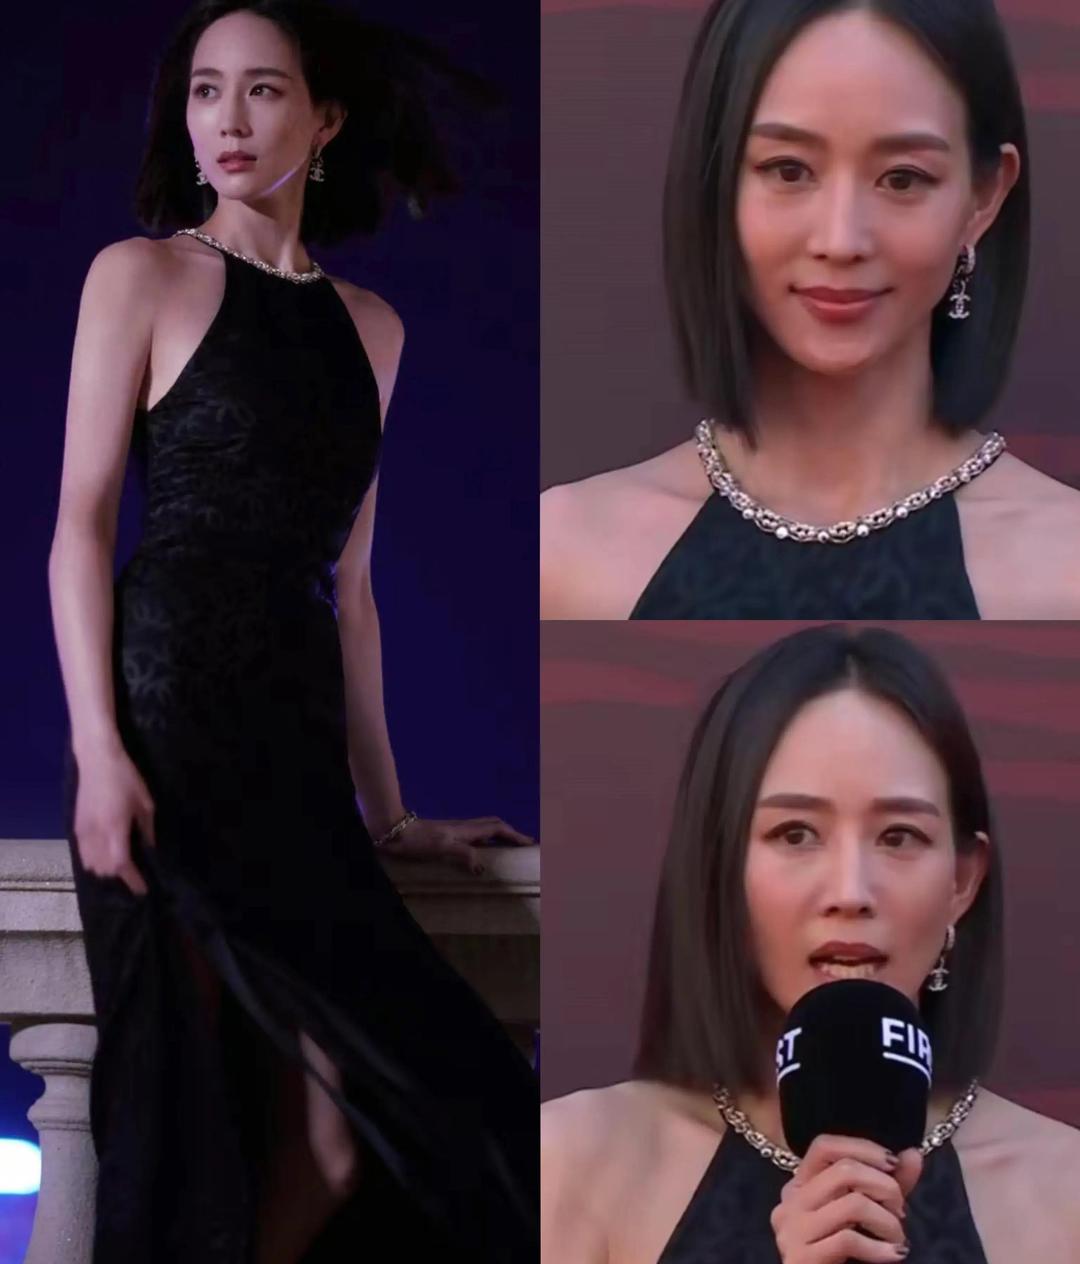 Female star red carpet look, Dongyu Zhou is the right time to wear it -  iMedia